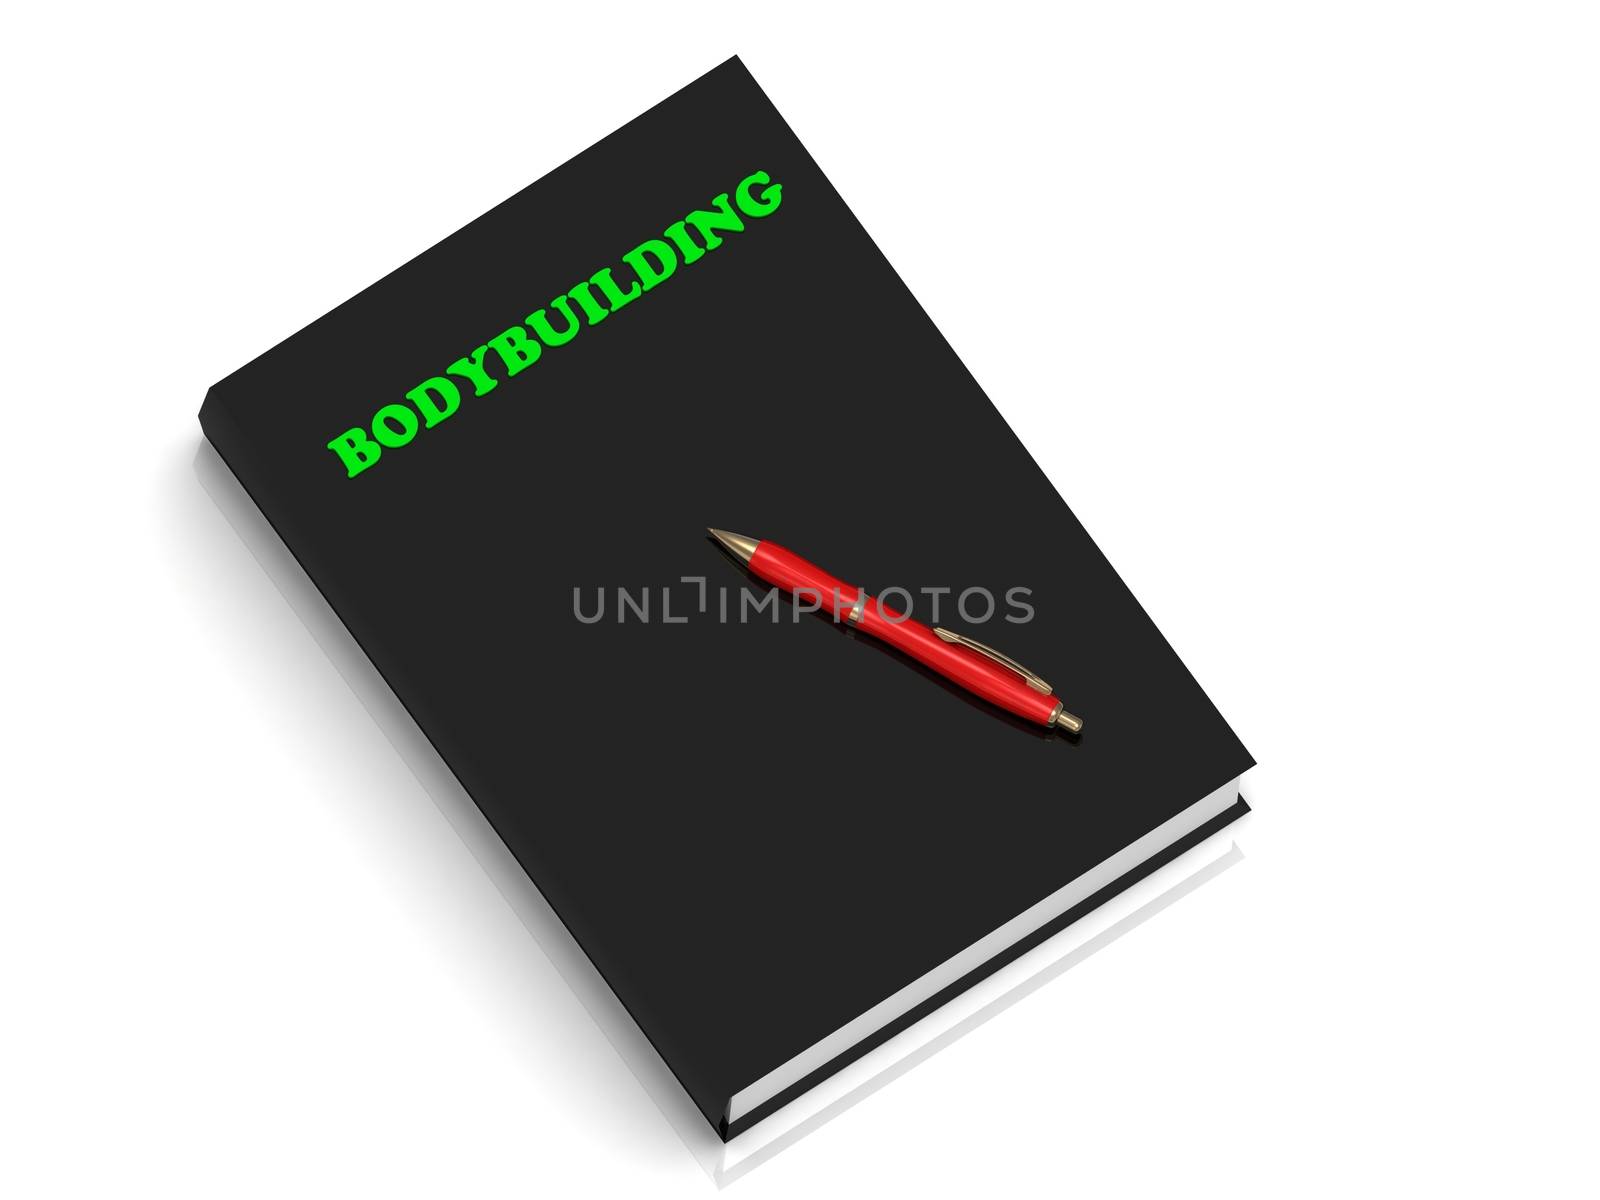 BODYBUILDING- inscription of green letters on black book by GreenMost